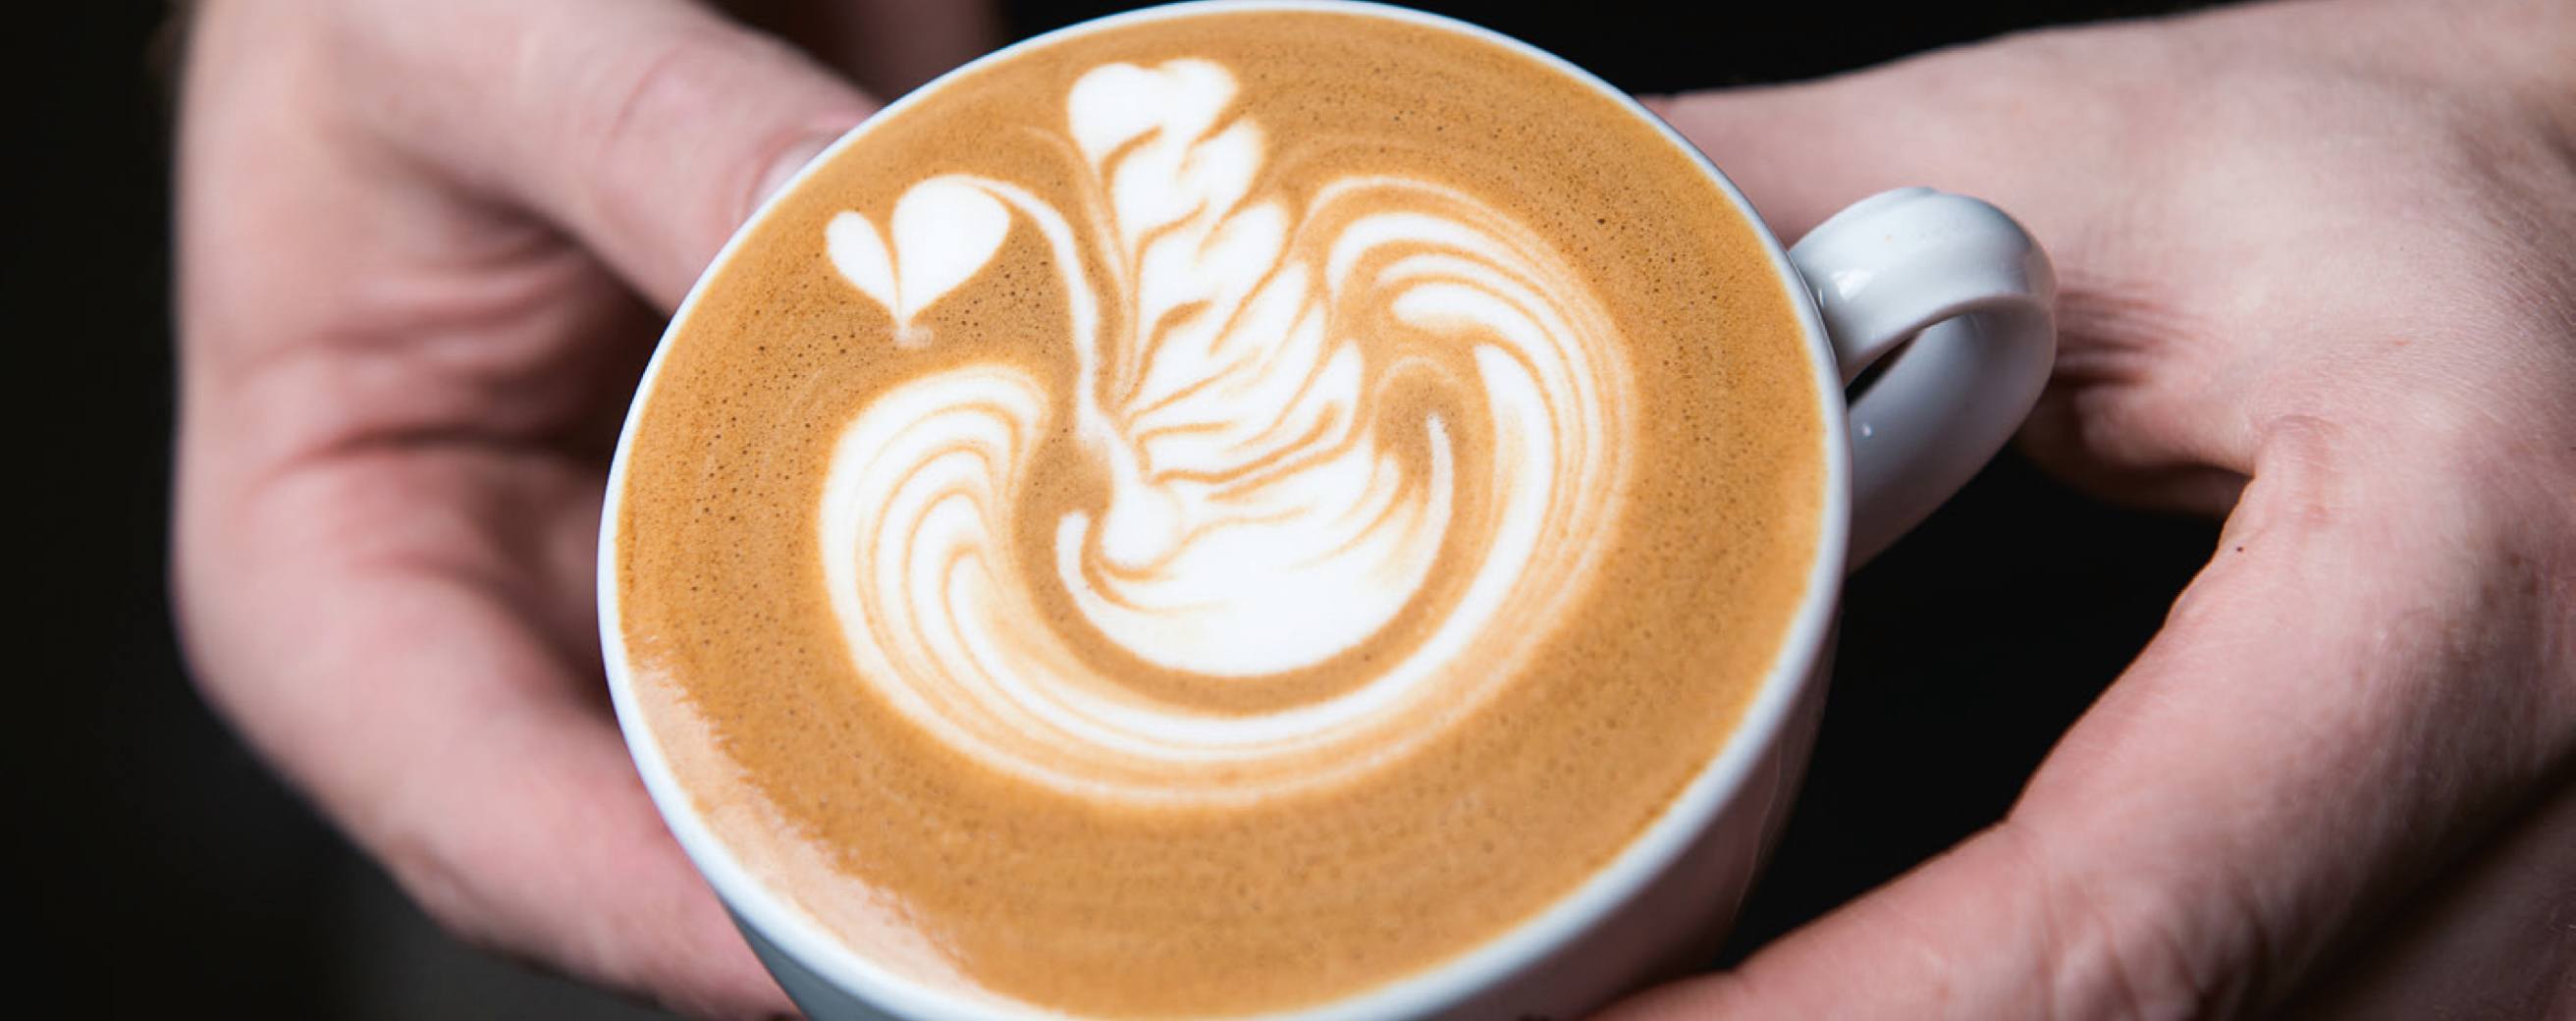 Learn how to make the perfect latte art swan with the smart milk solution